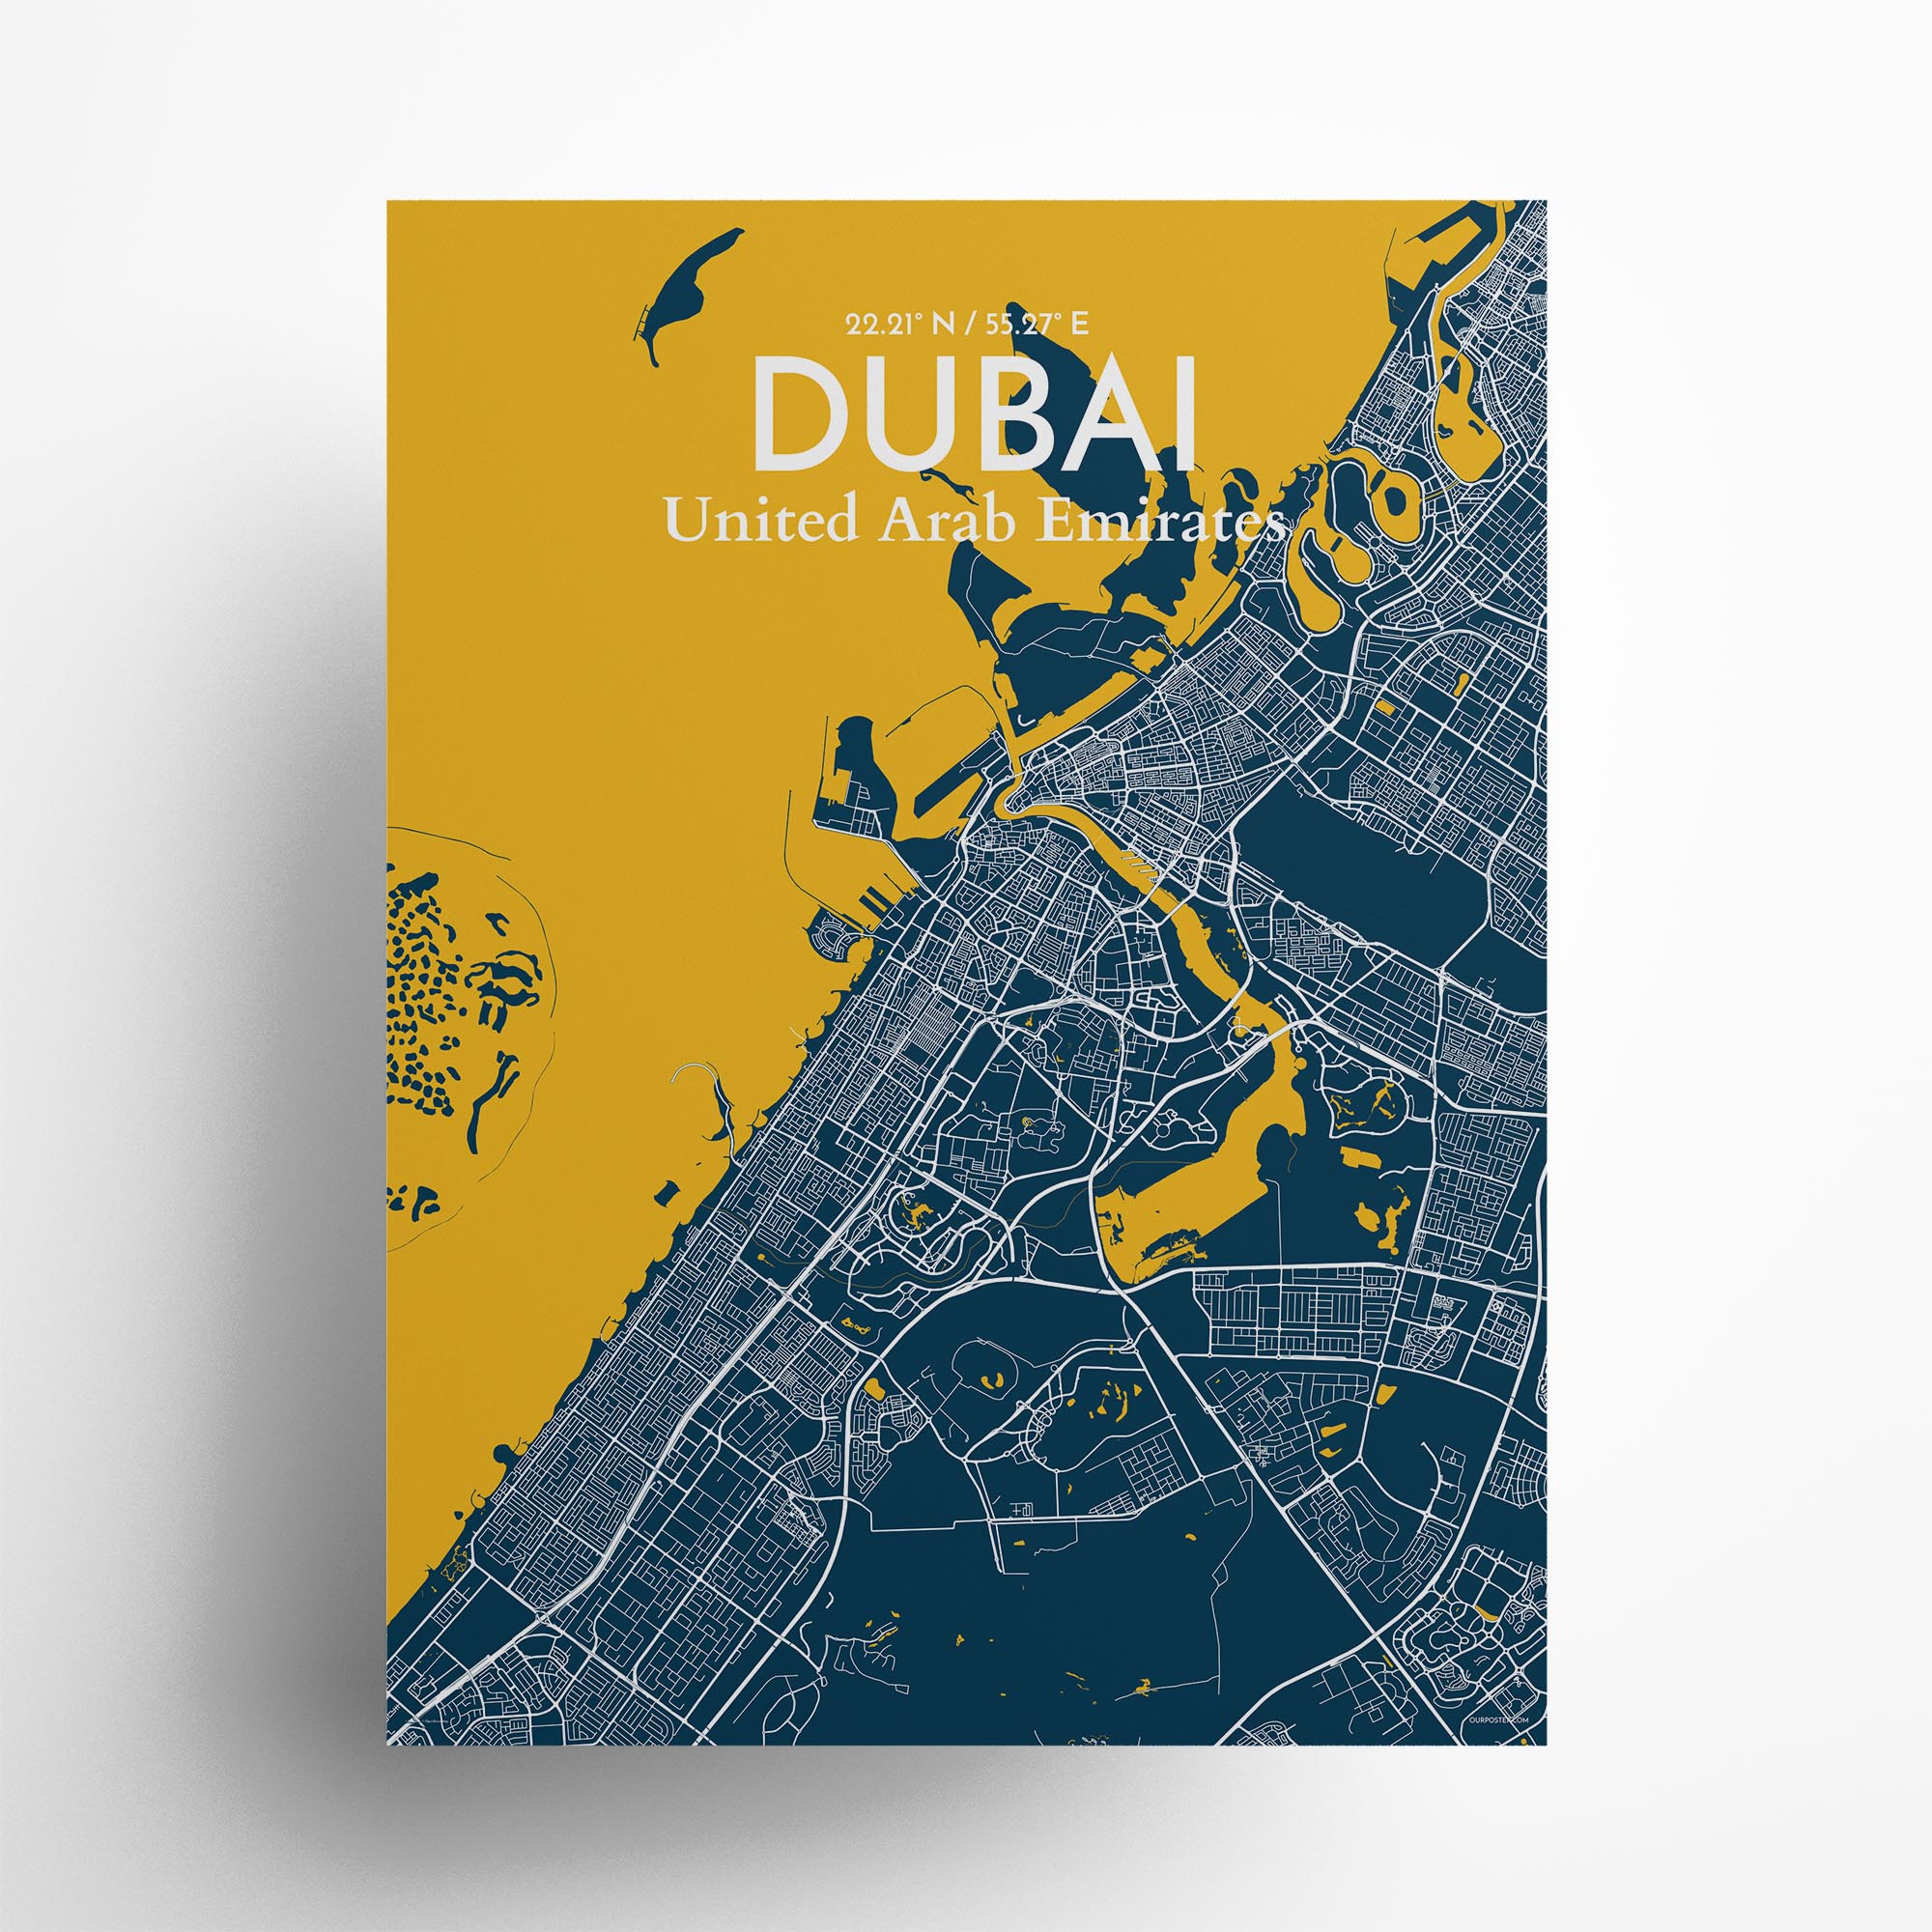 Dubai city map poster in Amuse of size 18" x 24"